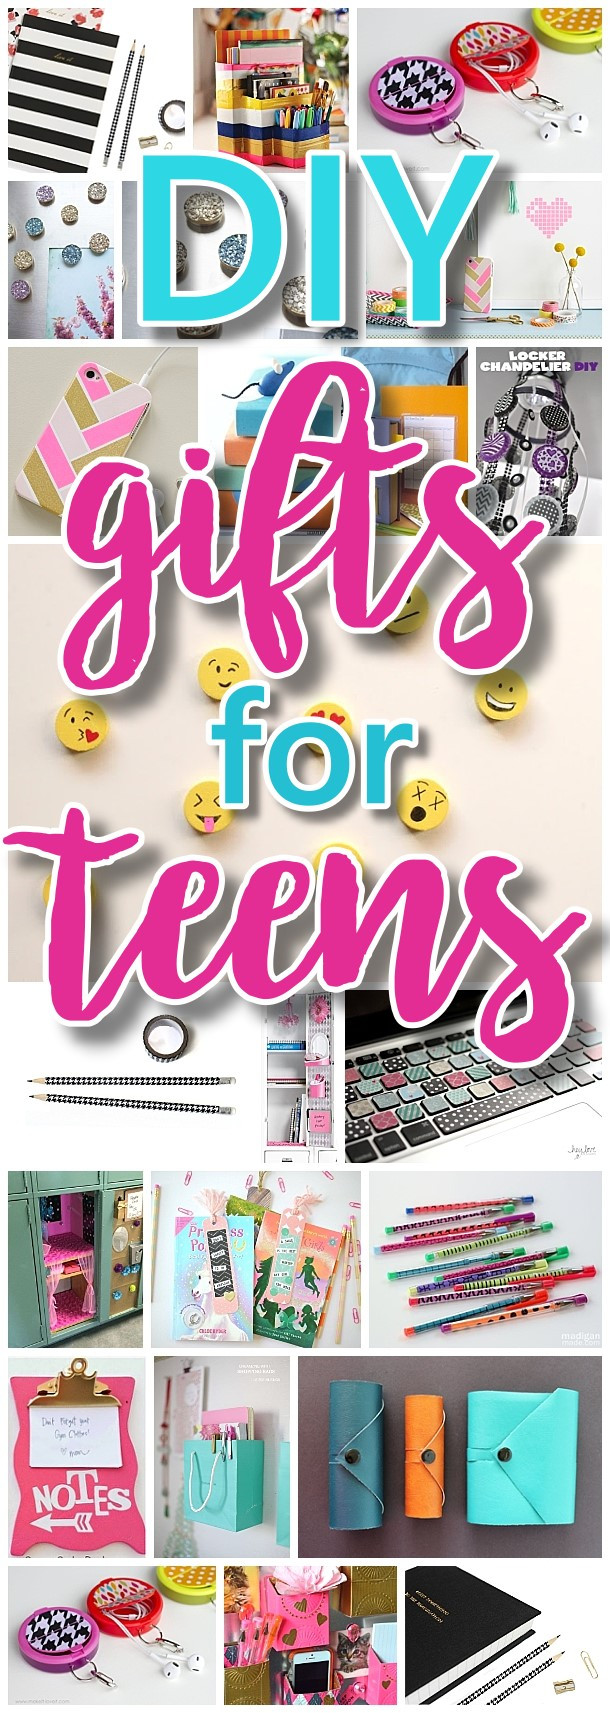 DIY Birthday Gifts For Best Friend Girl
 The BEST DIY Gifts for Teens Tweens and Best Friends